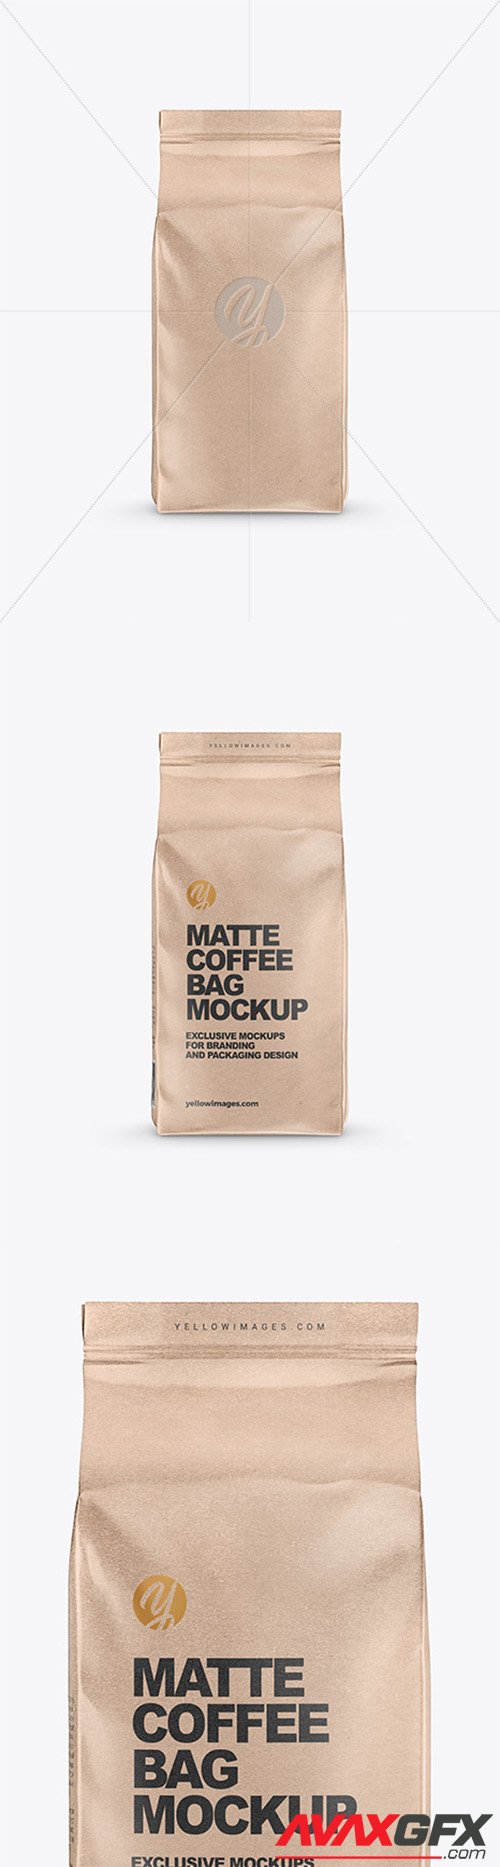 Download Kraft Coffee Bag Mockup 61225 Avaxgfx All Downloads That You Need In One Place Graphic From Nitroflare Rapidgator Yellowimages Mockups